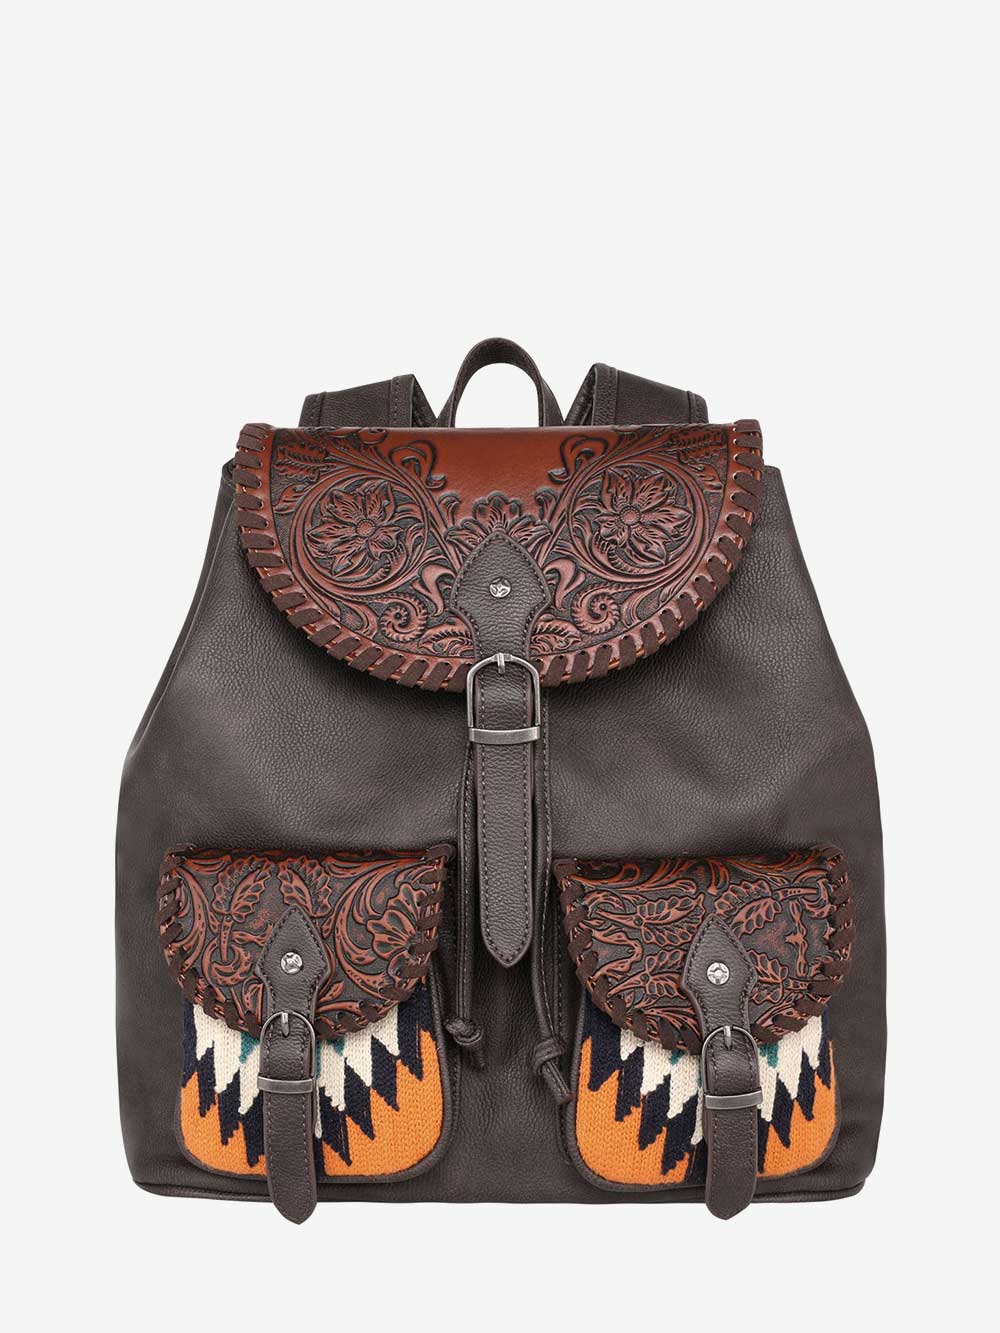 (Sale) Montana West Floral Tooled Graphic Drawstring Backpack - Montana West World